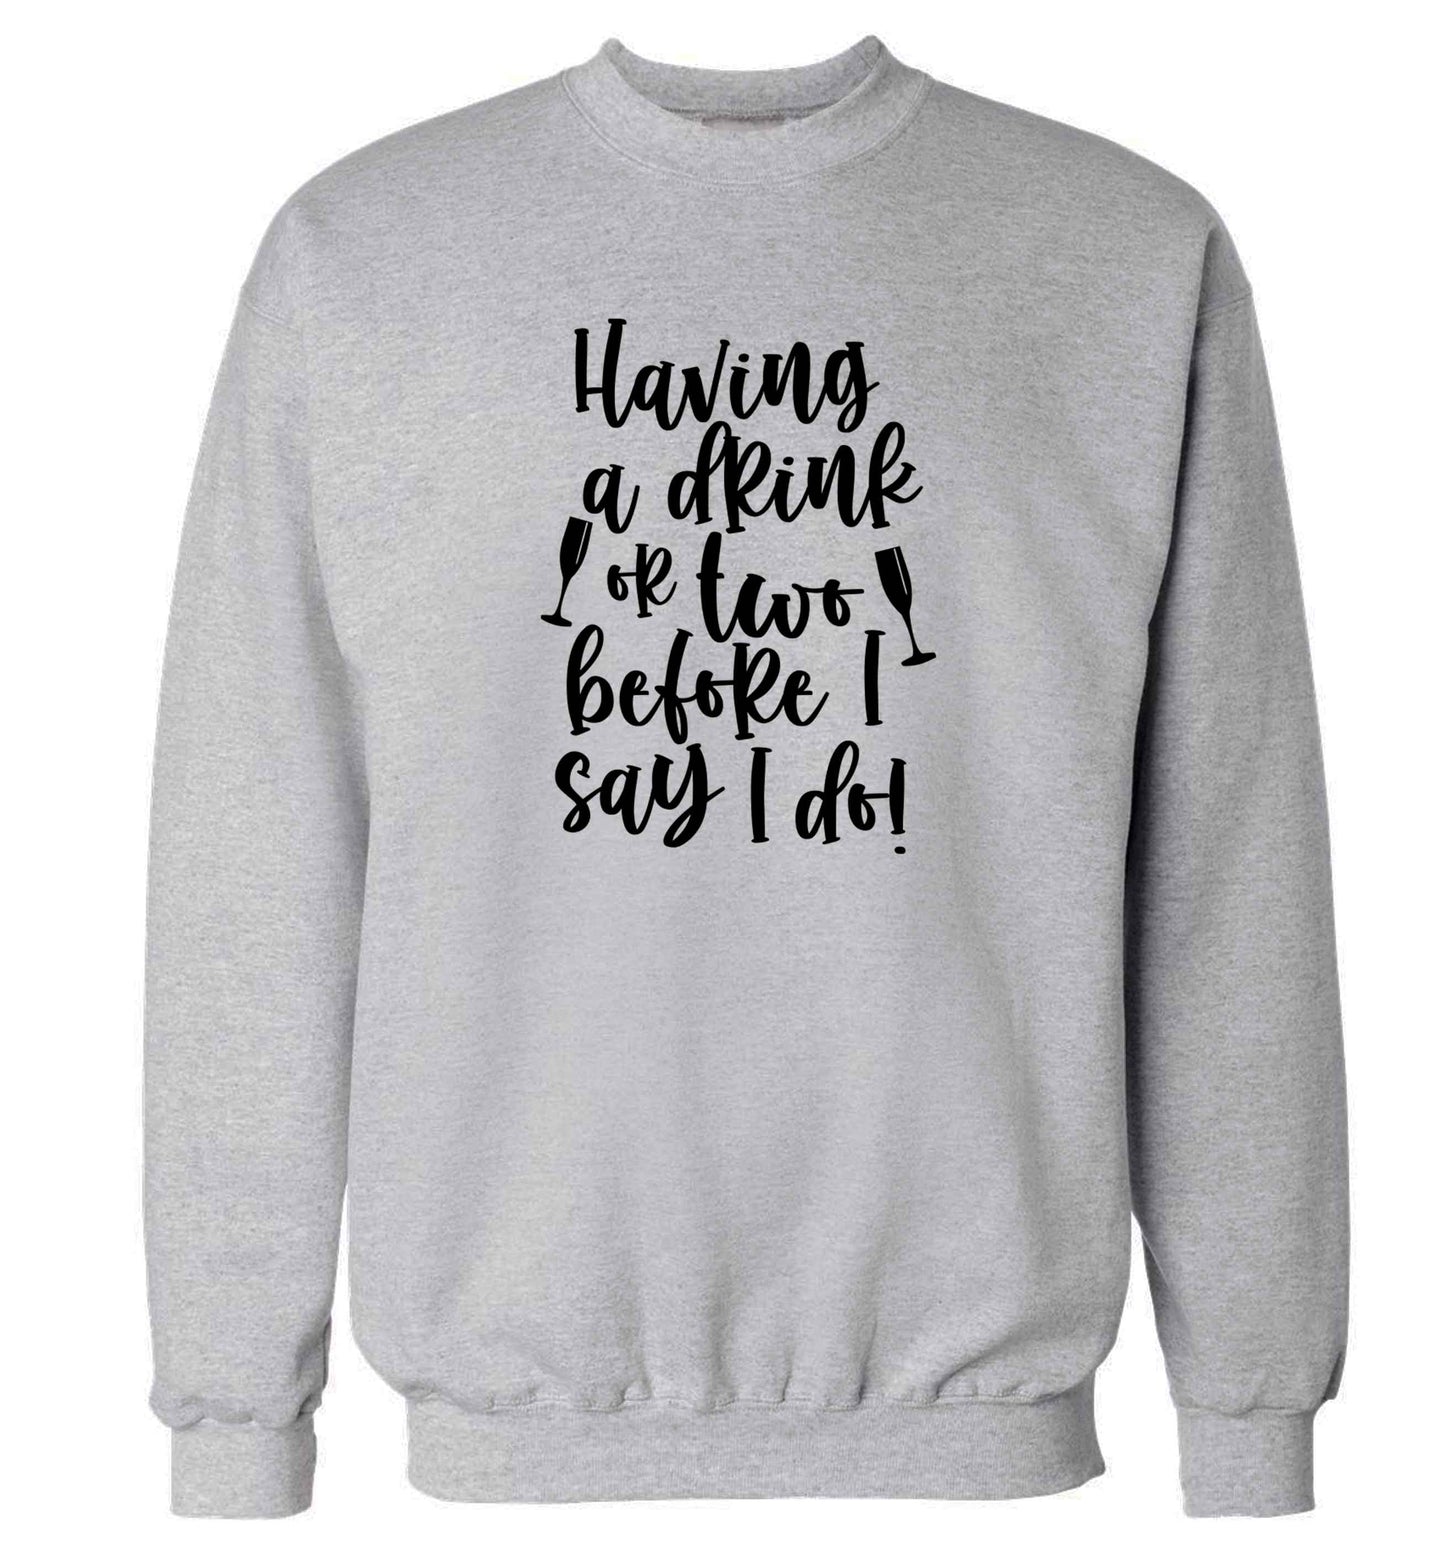 Having a drink or two before I say I do adult's unisex grey sweater 2XL